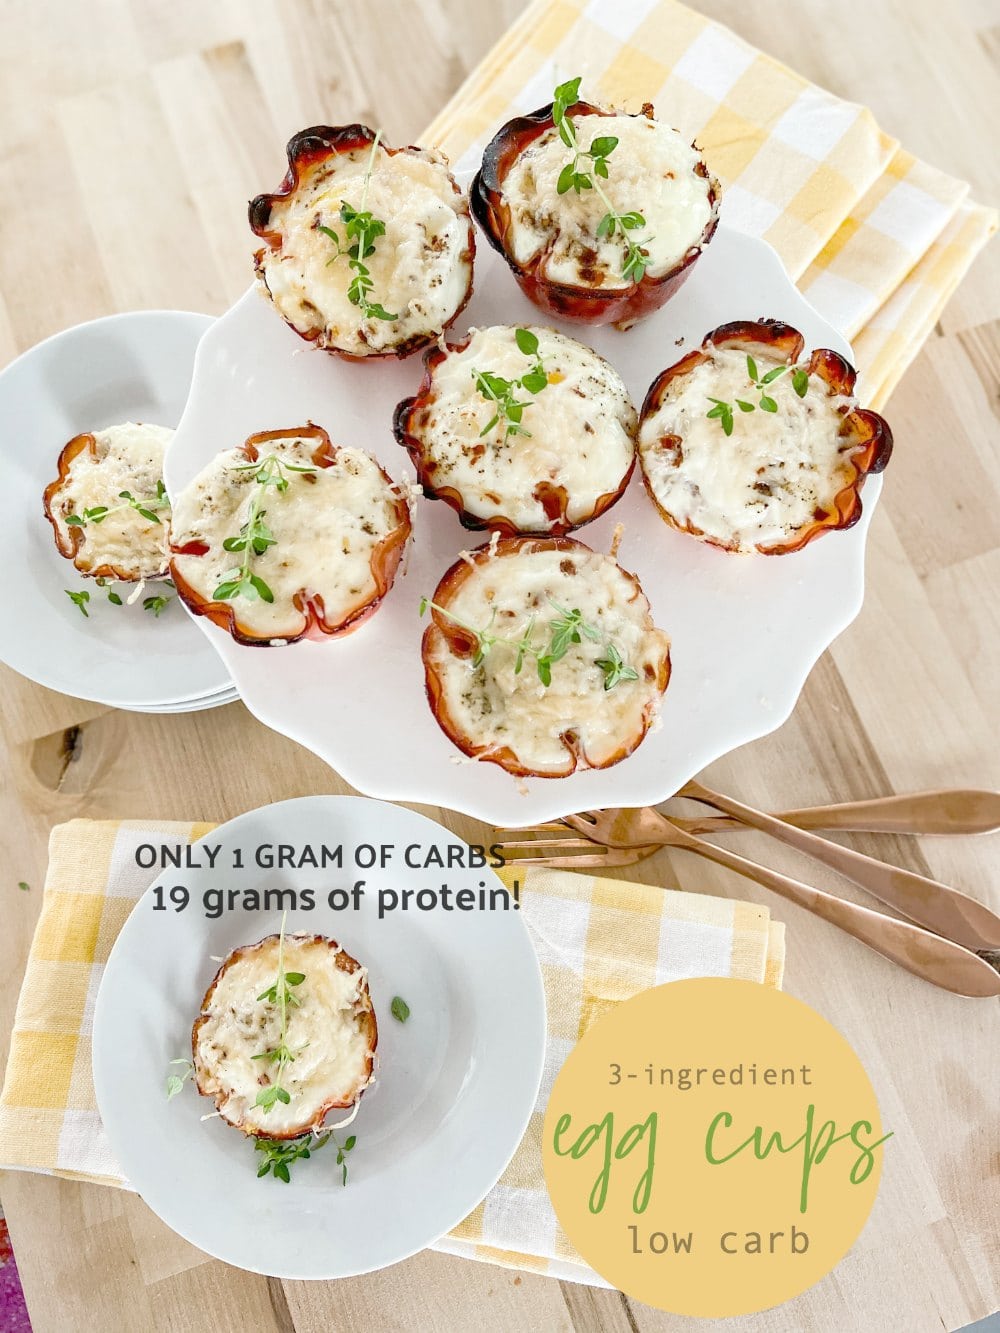 3-ingredient low carb egg cups 1 gram of carbs each